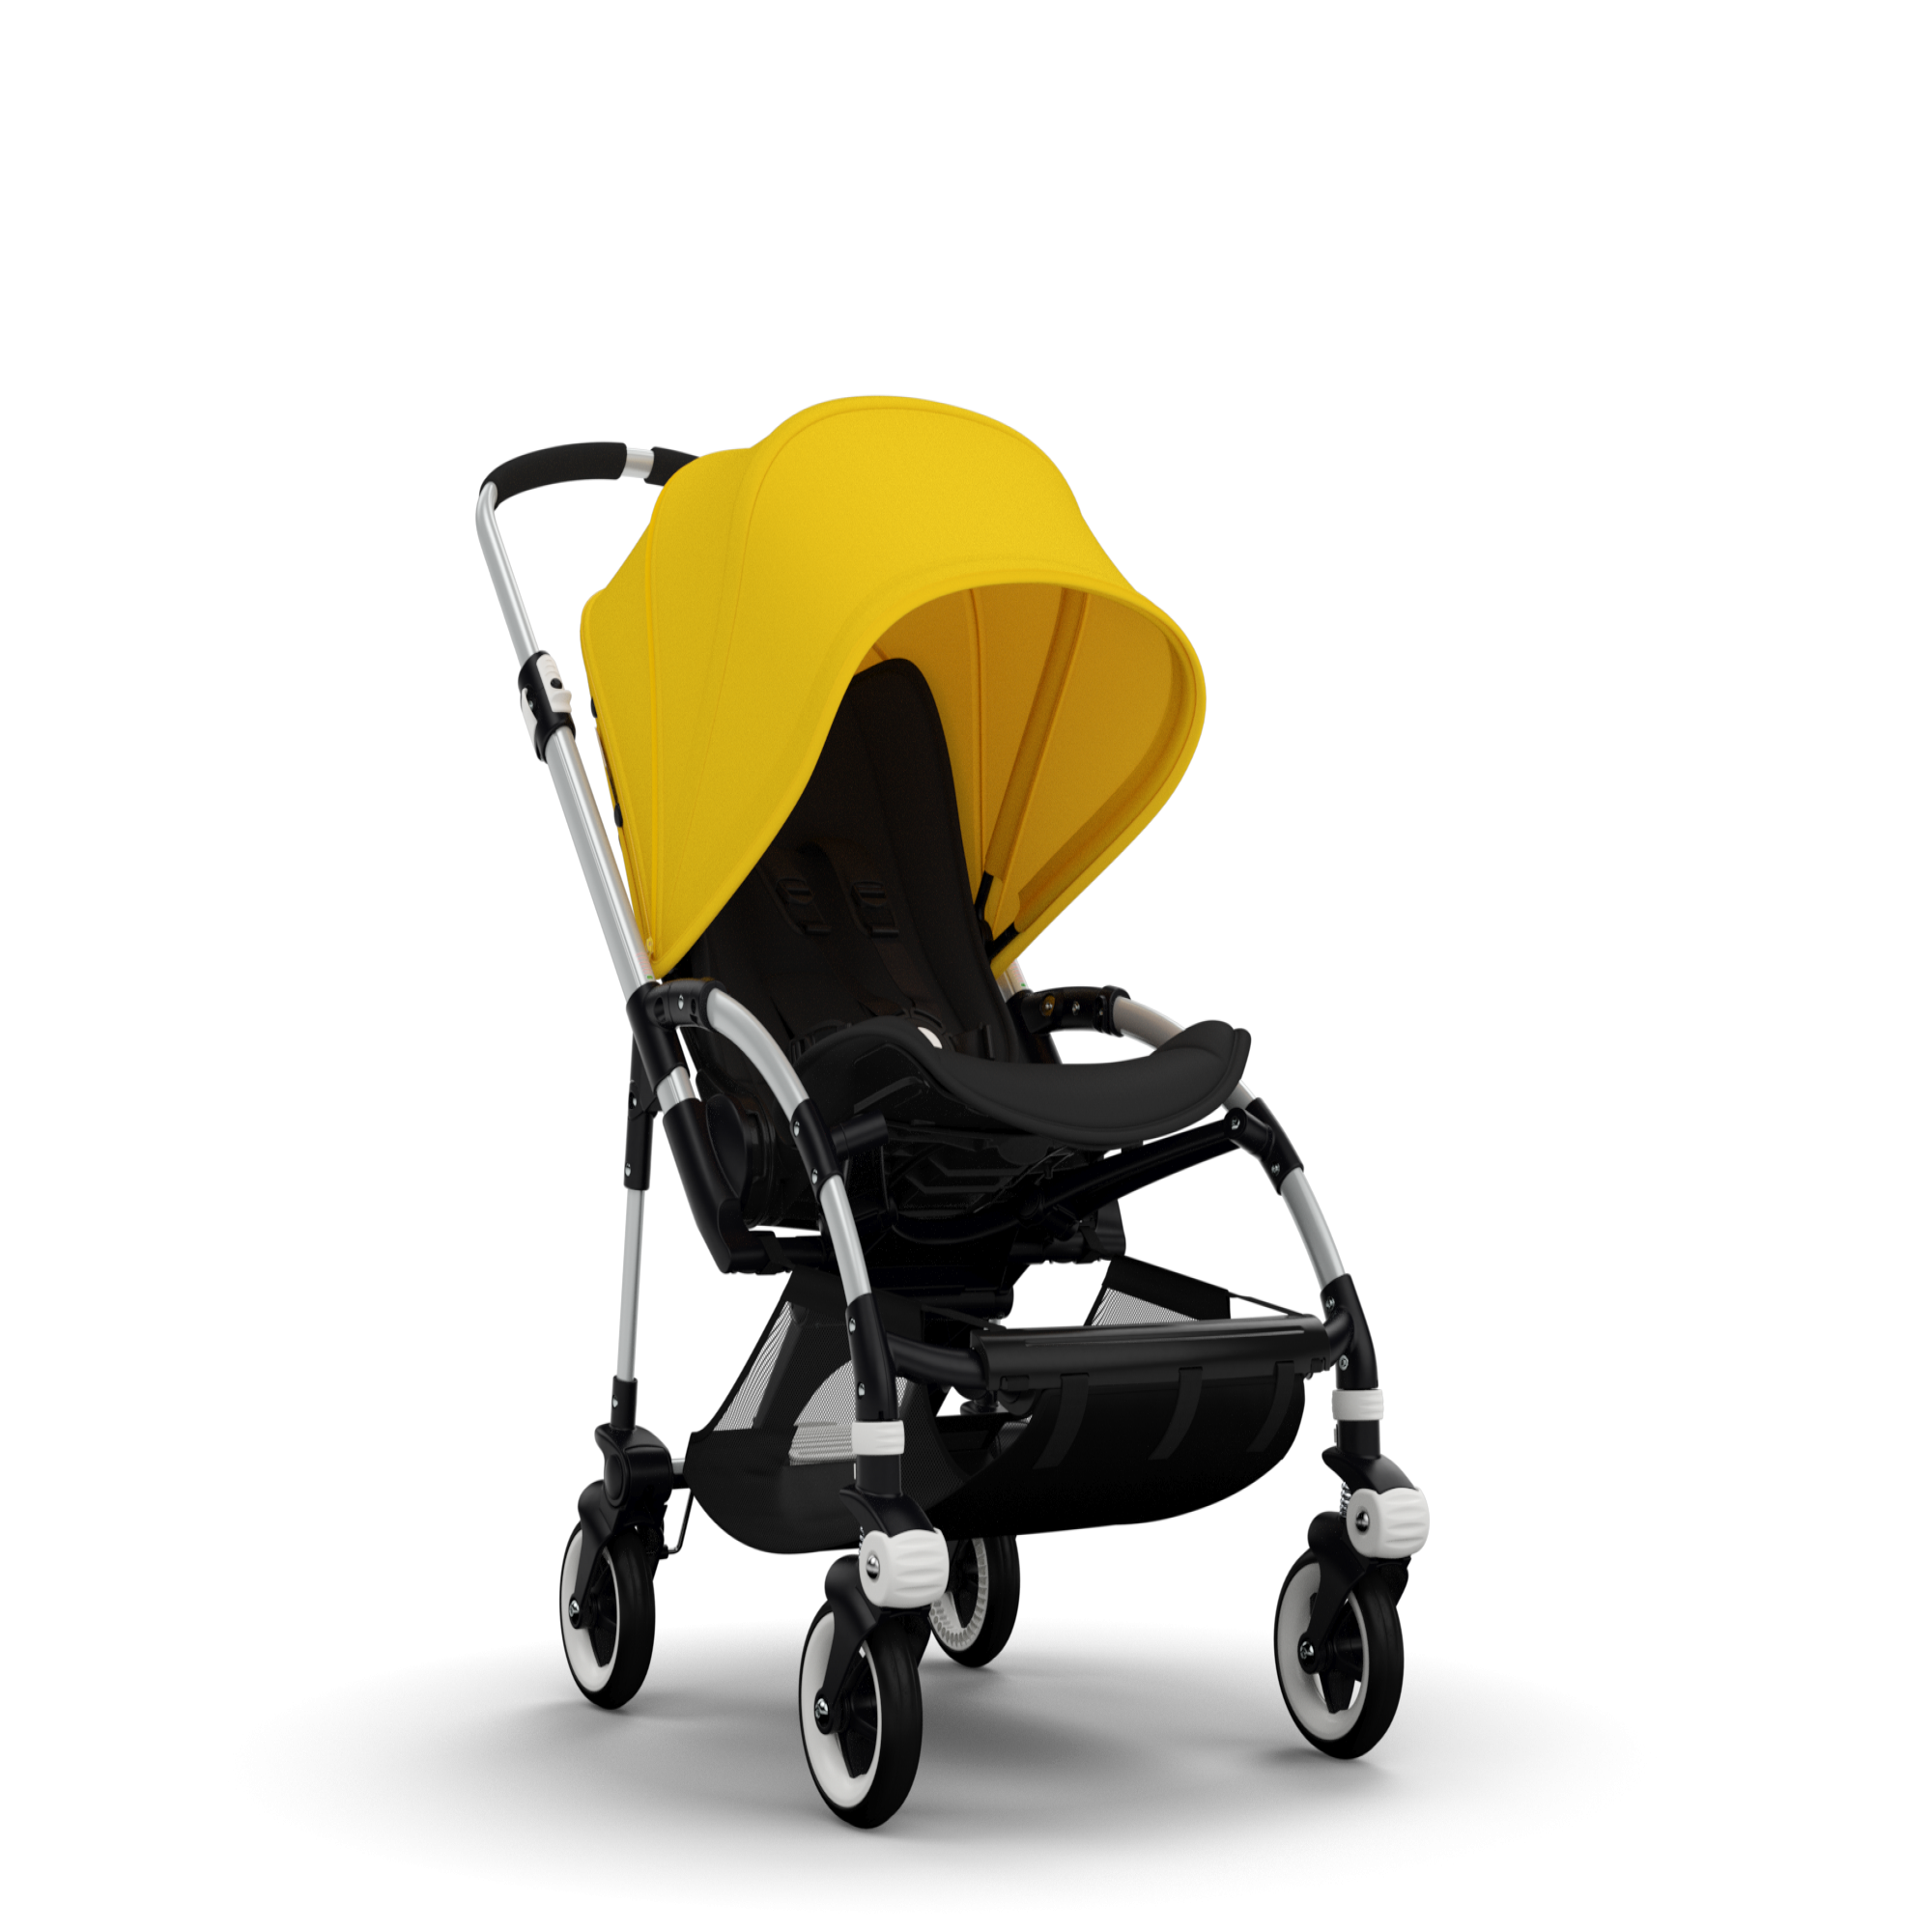 Bugaboo Bee 3 sun canopy (extendable/ old colors) | Bugaboo